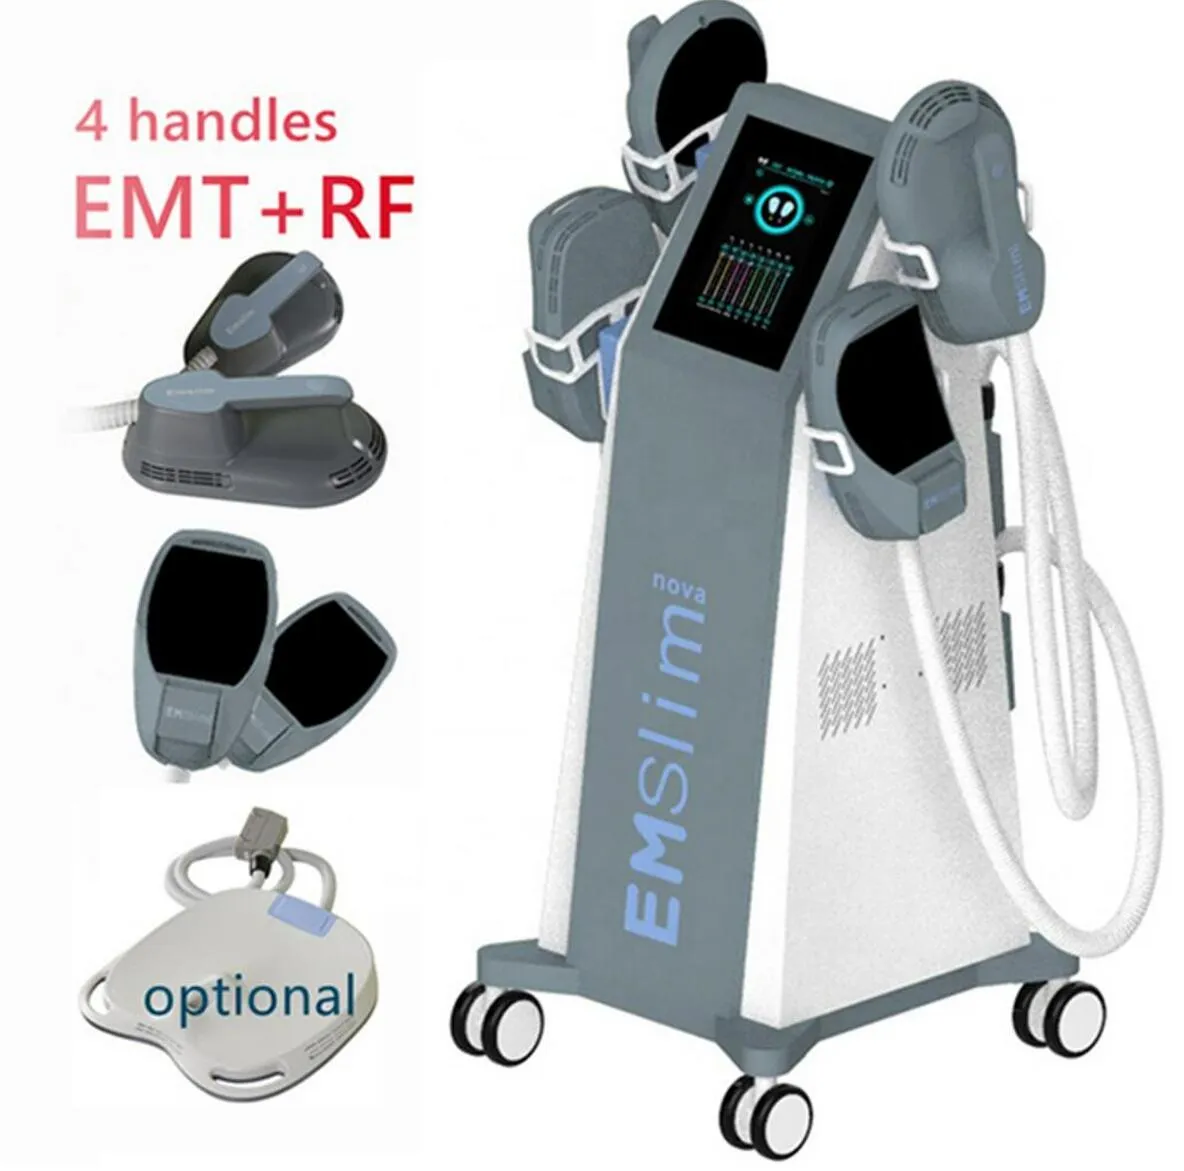 High quality EMslim RF HI-EMT slimming machine shaping EMS electromagnetic Muscle Stimulation fat burning Cellulite Removal with Rf and Cushion Equipment